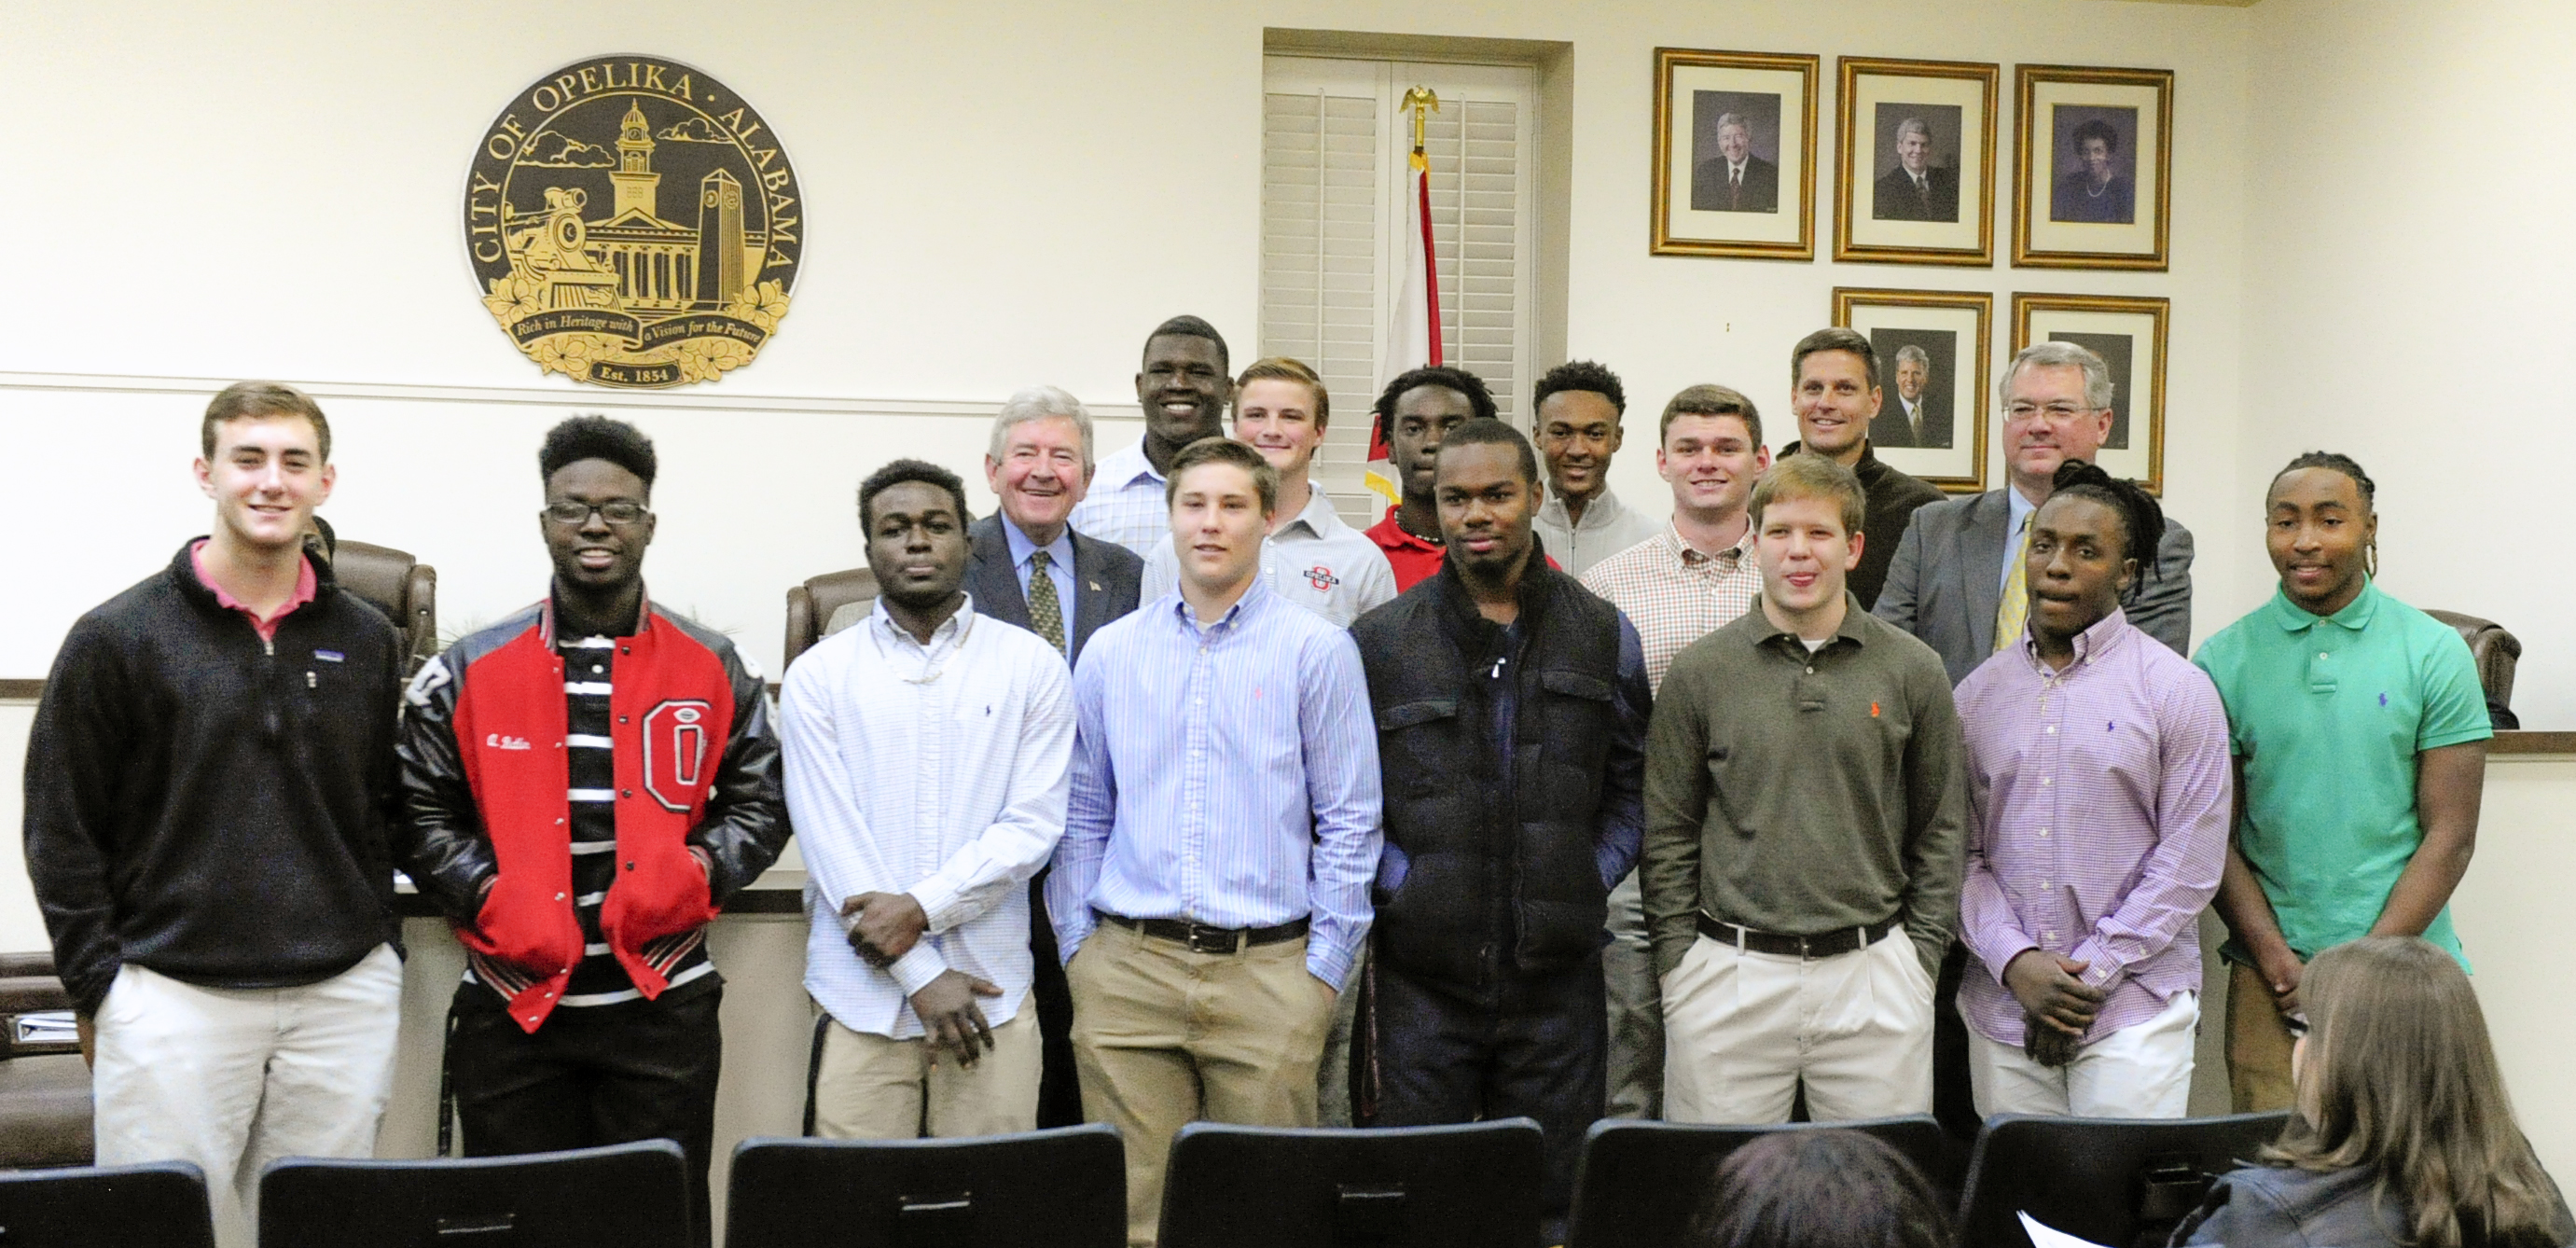 OHS football team recognized at city council meeting